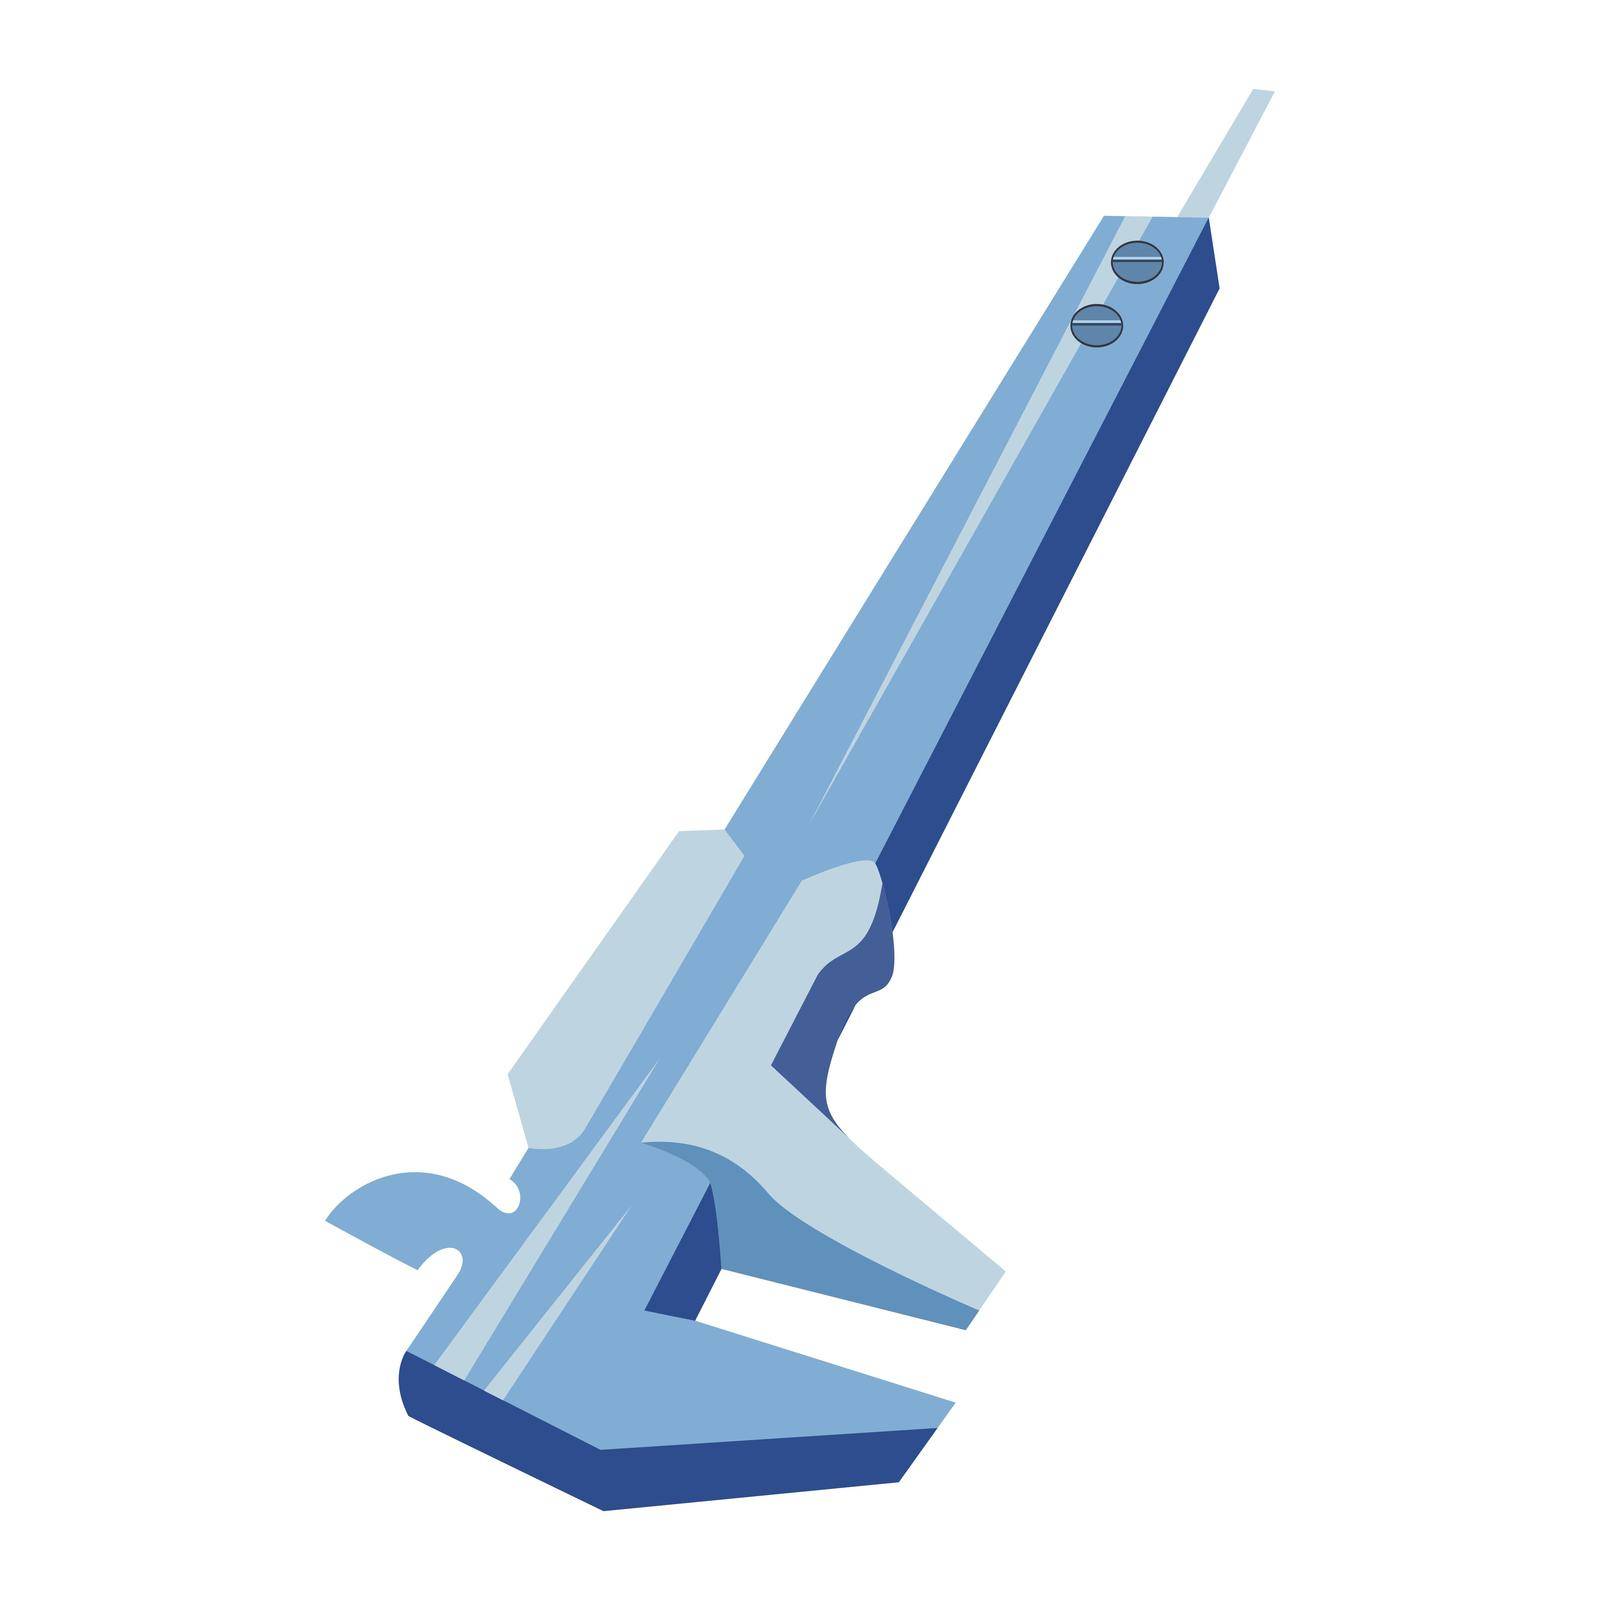 The vernier caliper is used for measuring the height of an object, equipped flat illustration.